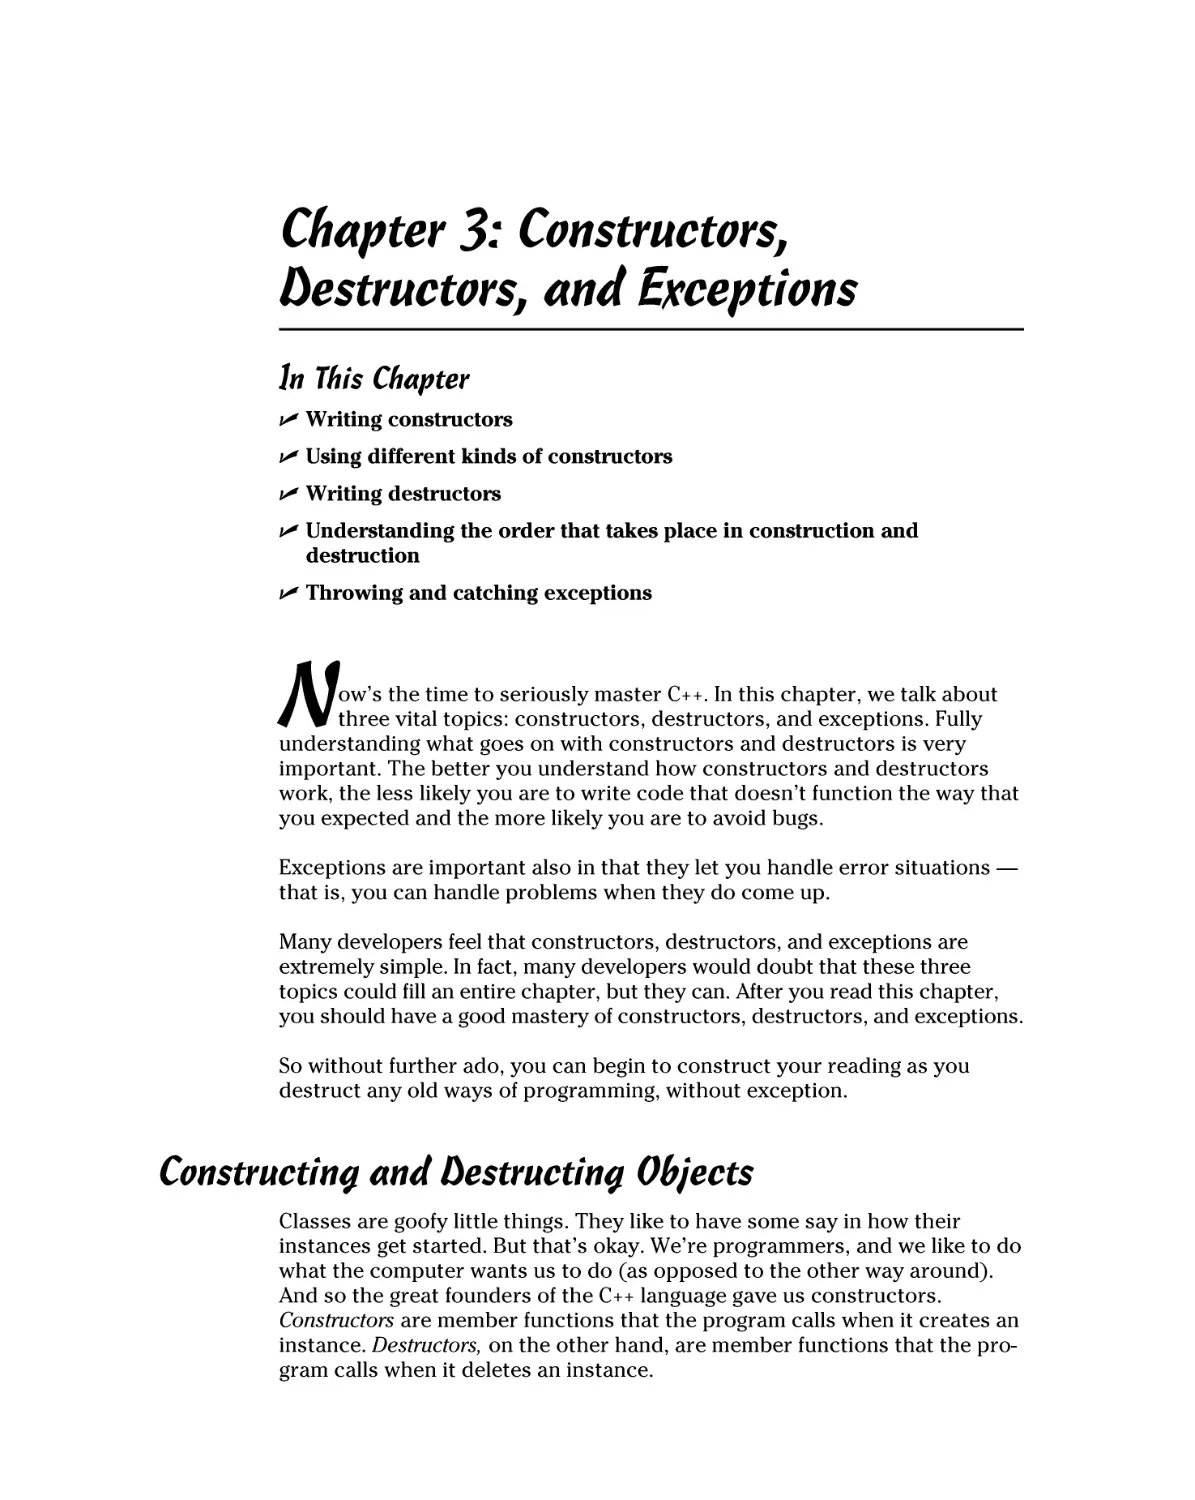 Chapter 3
Constructing and Destructing Objects